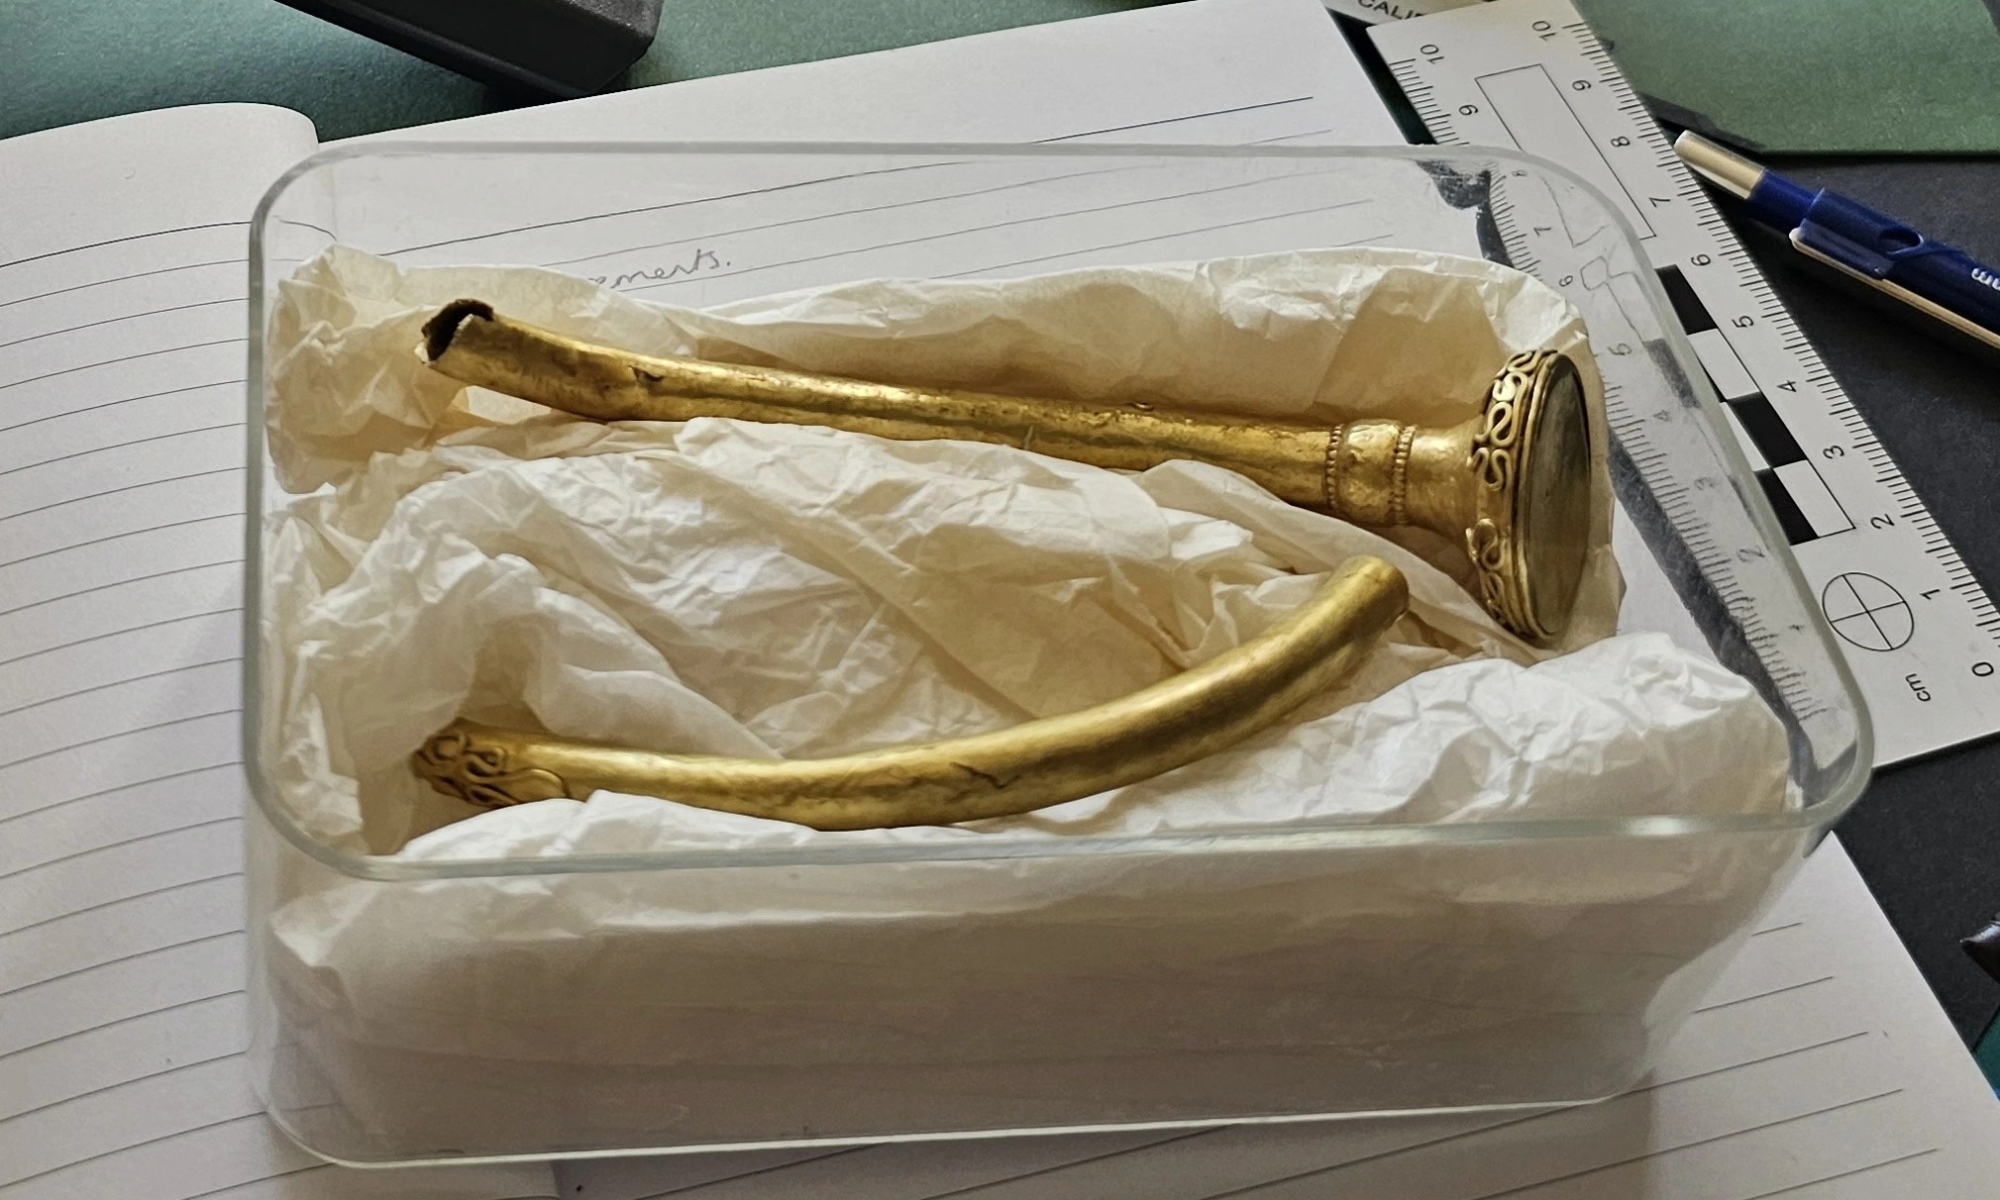 A gold broken torc in a plastic box, resting in tissue paper. The box is sat on a notebook